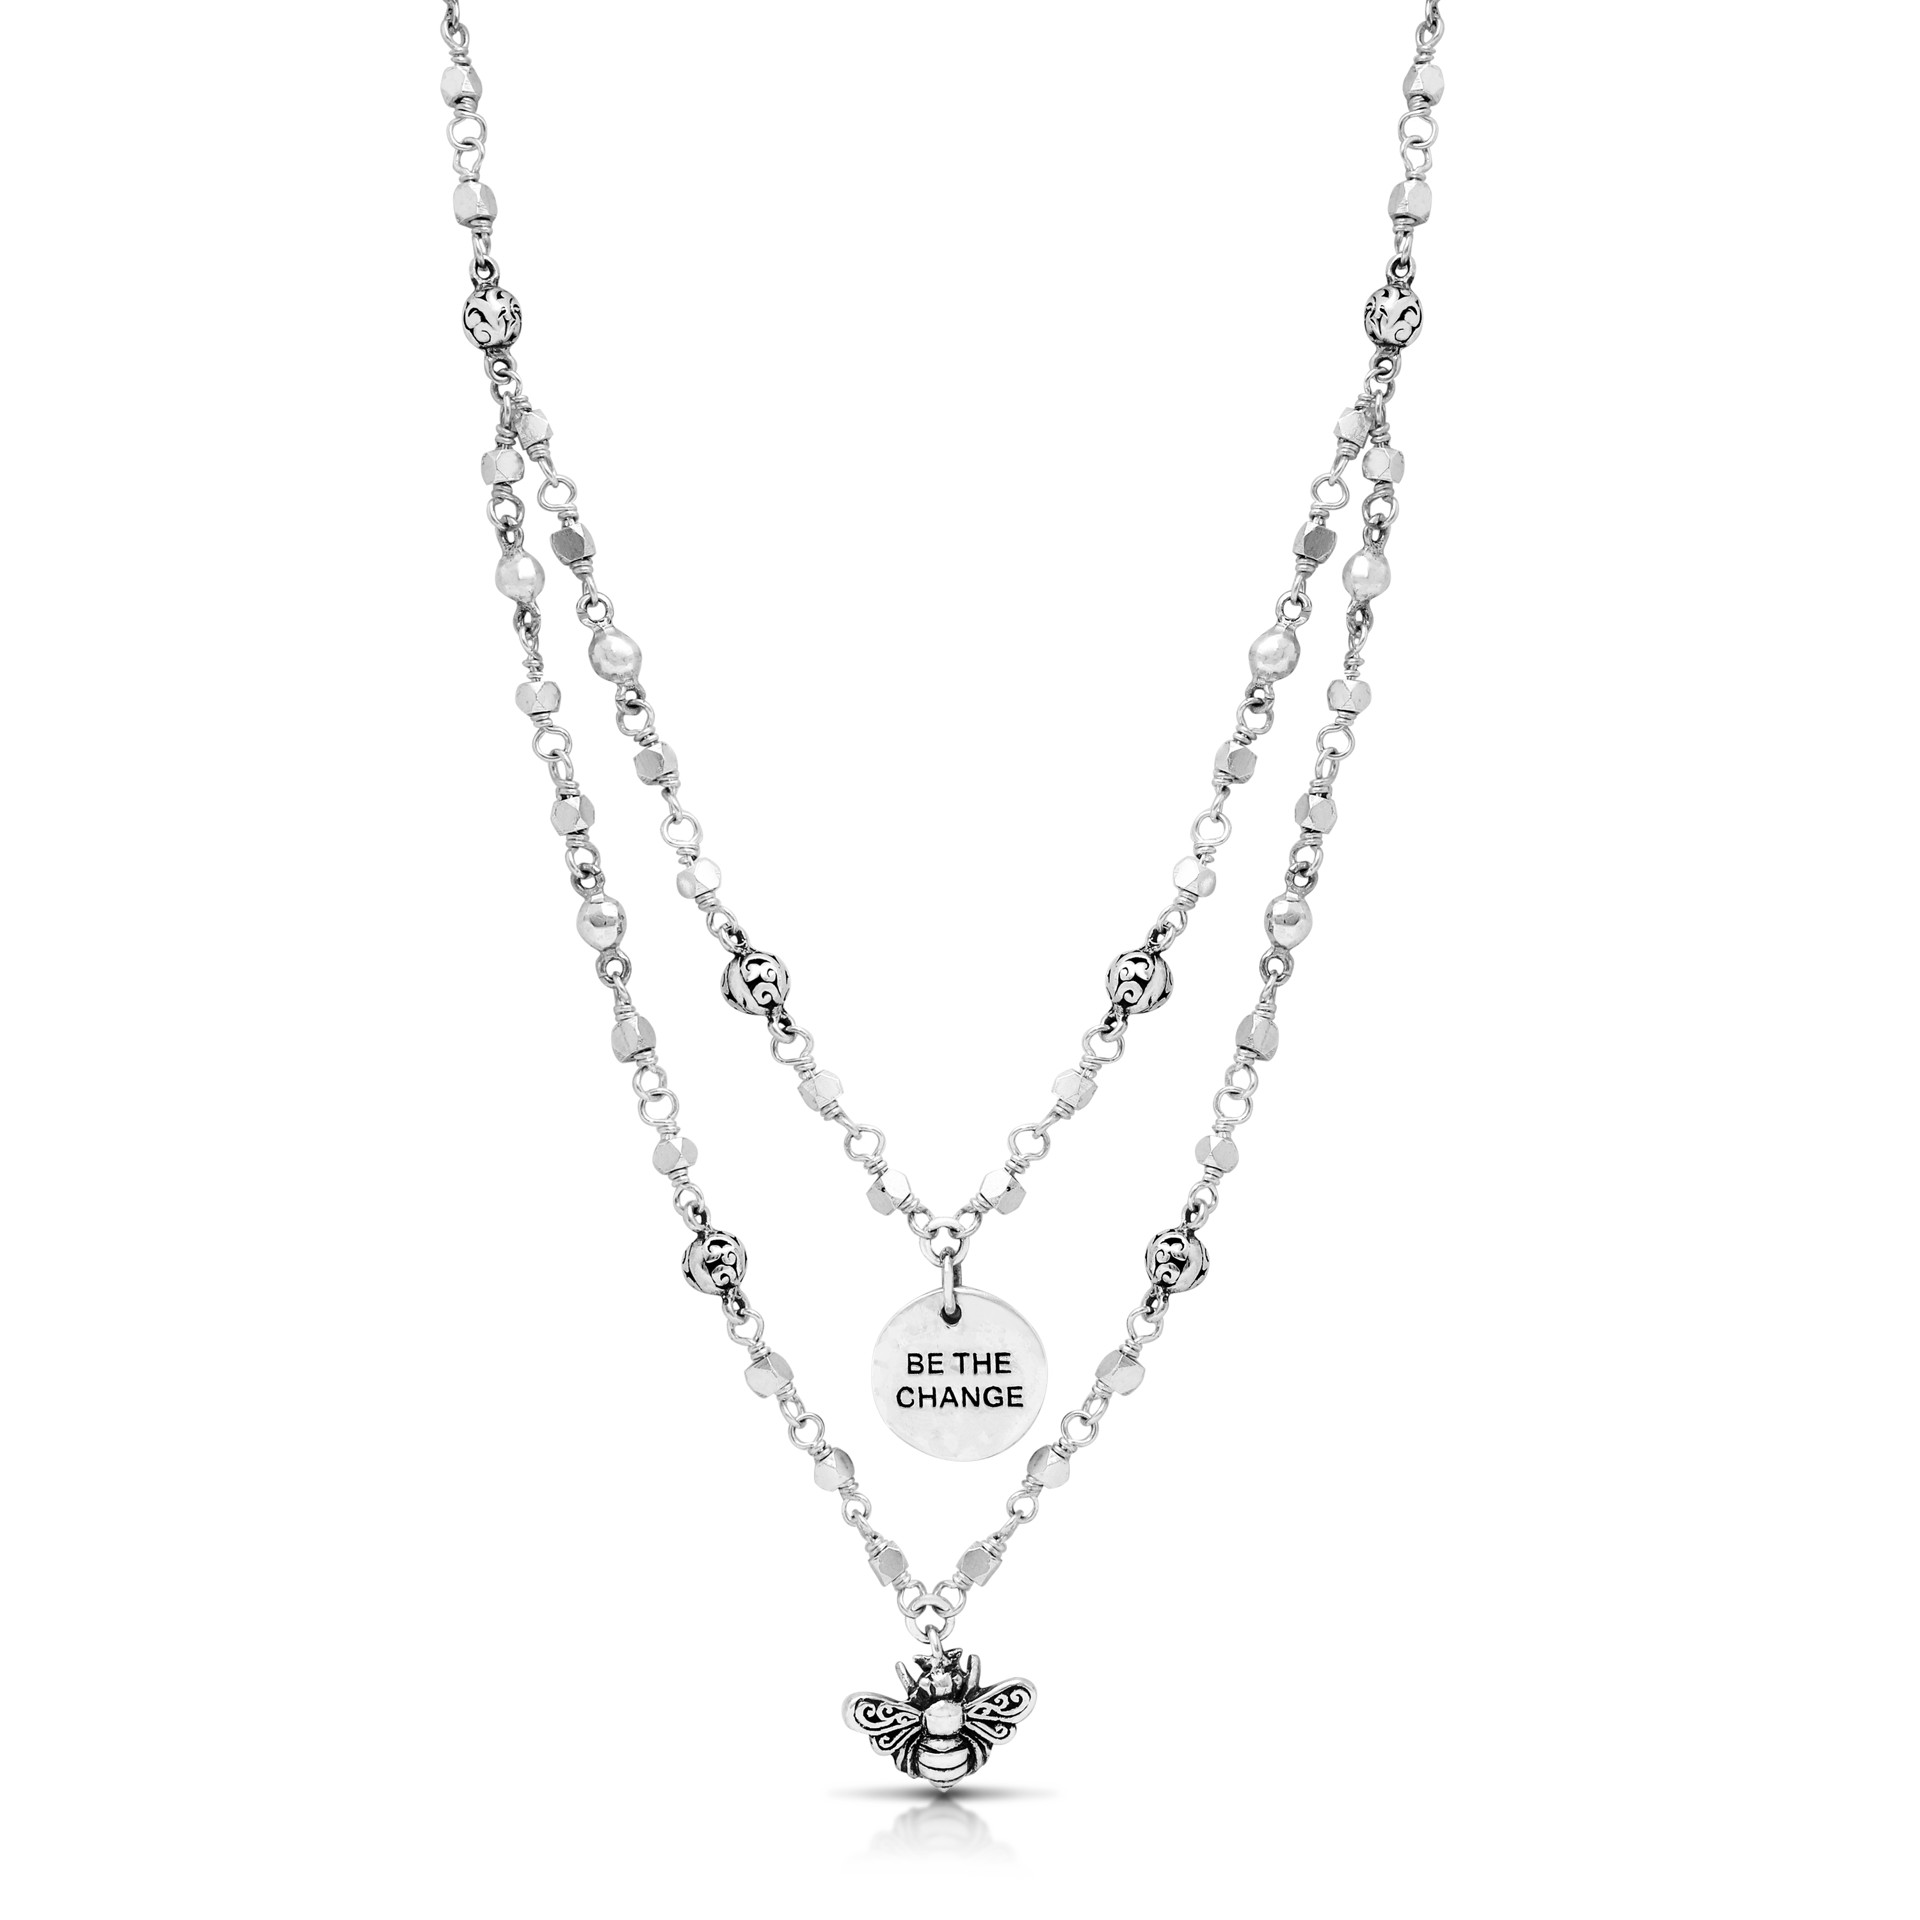 9769 Sterling Silver Double Layered Necklace with Bee Pendant and "Be the Change" Charm by Lois Hill